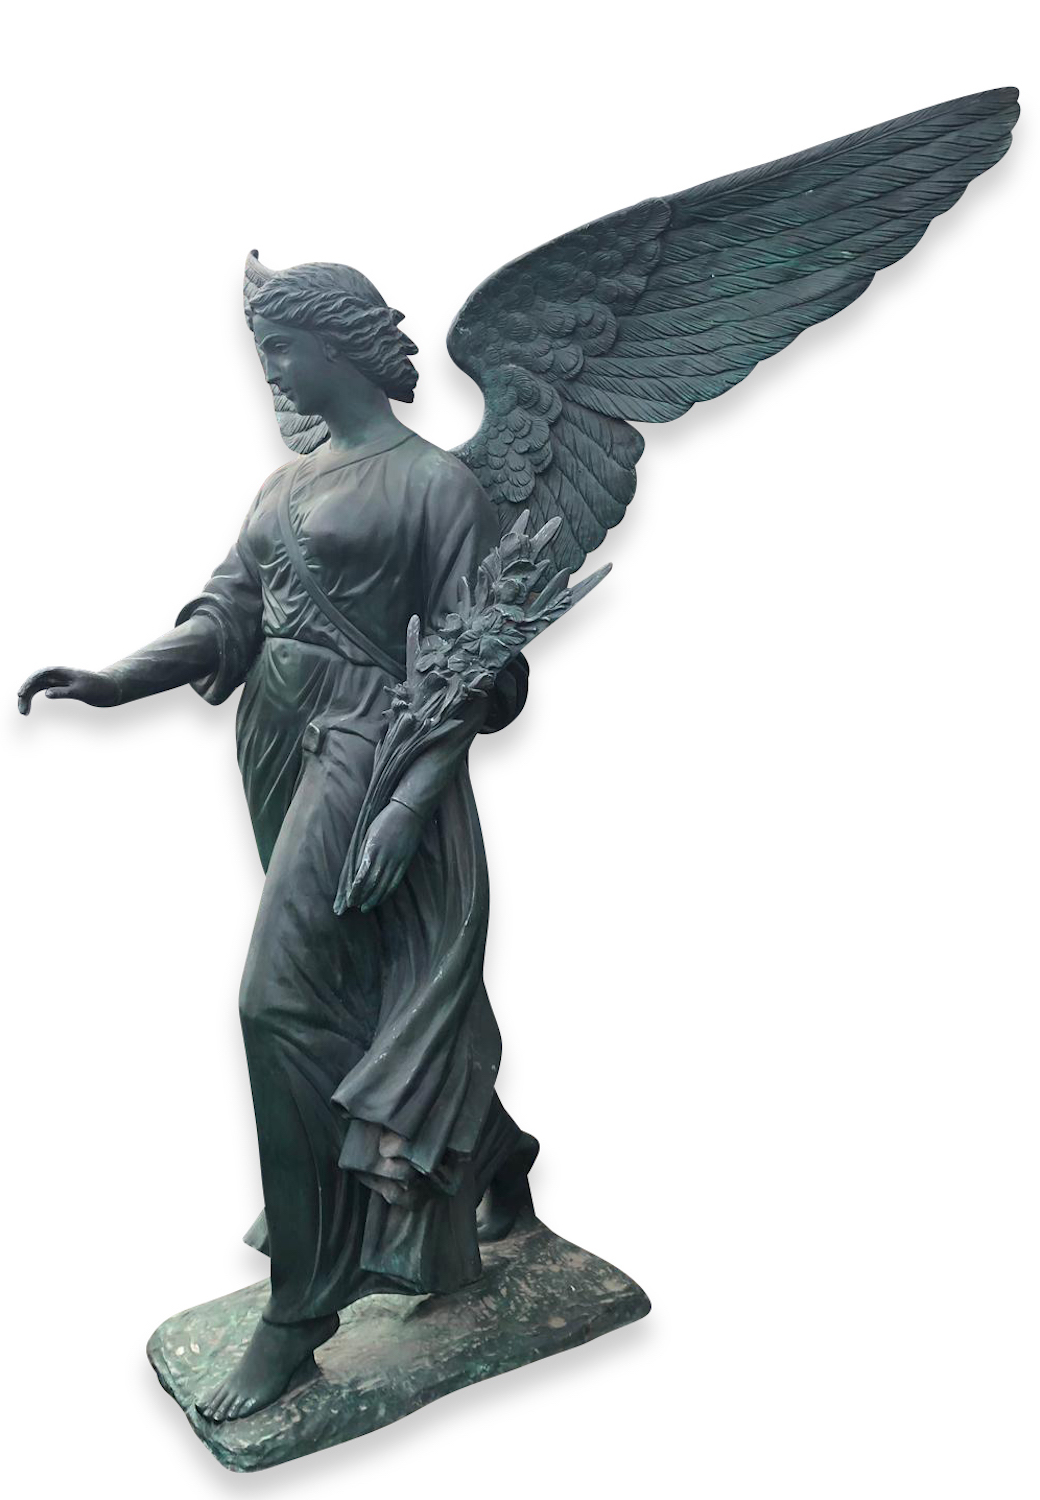 Bronzefigur ANGEL OF THE WATERS, 220 cm